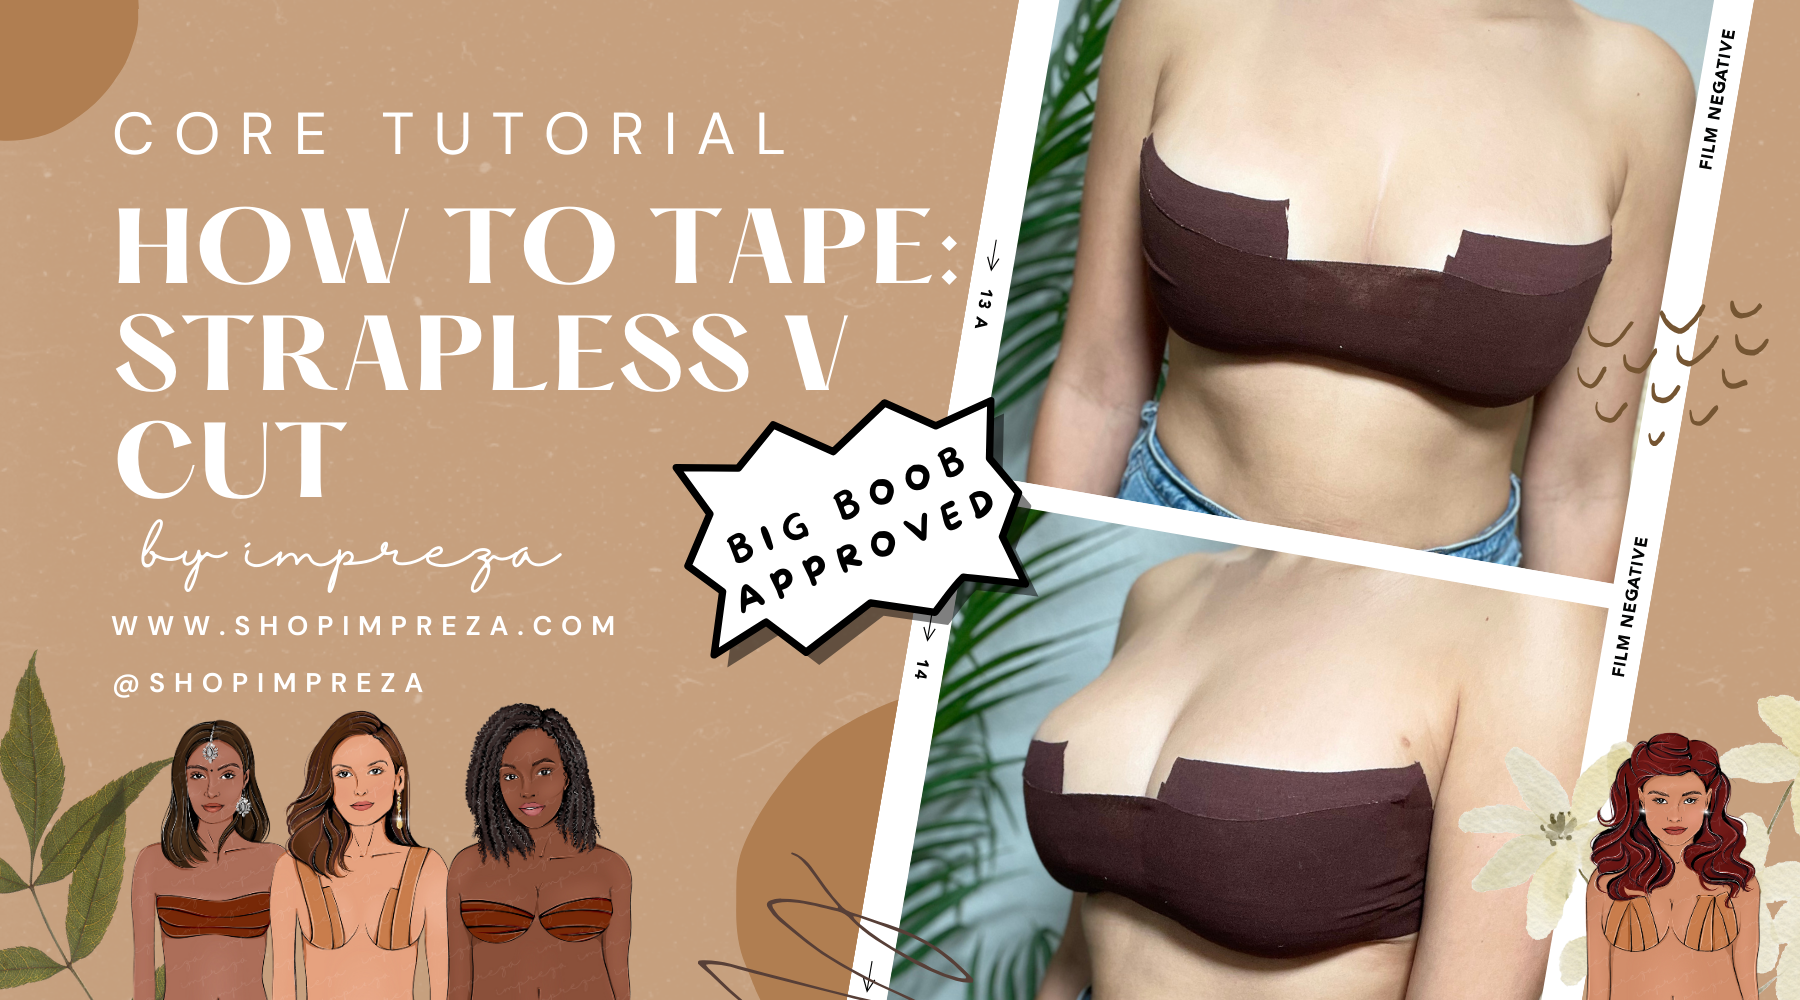 Body tape tutorial with a strapless top 💃🏼 #fashionoutfits #trending